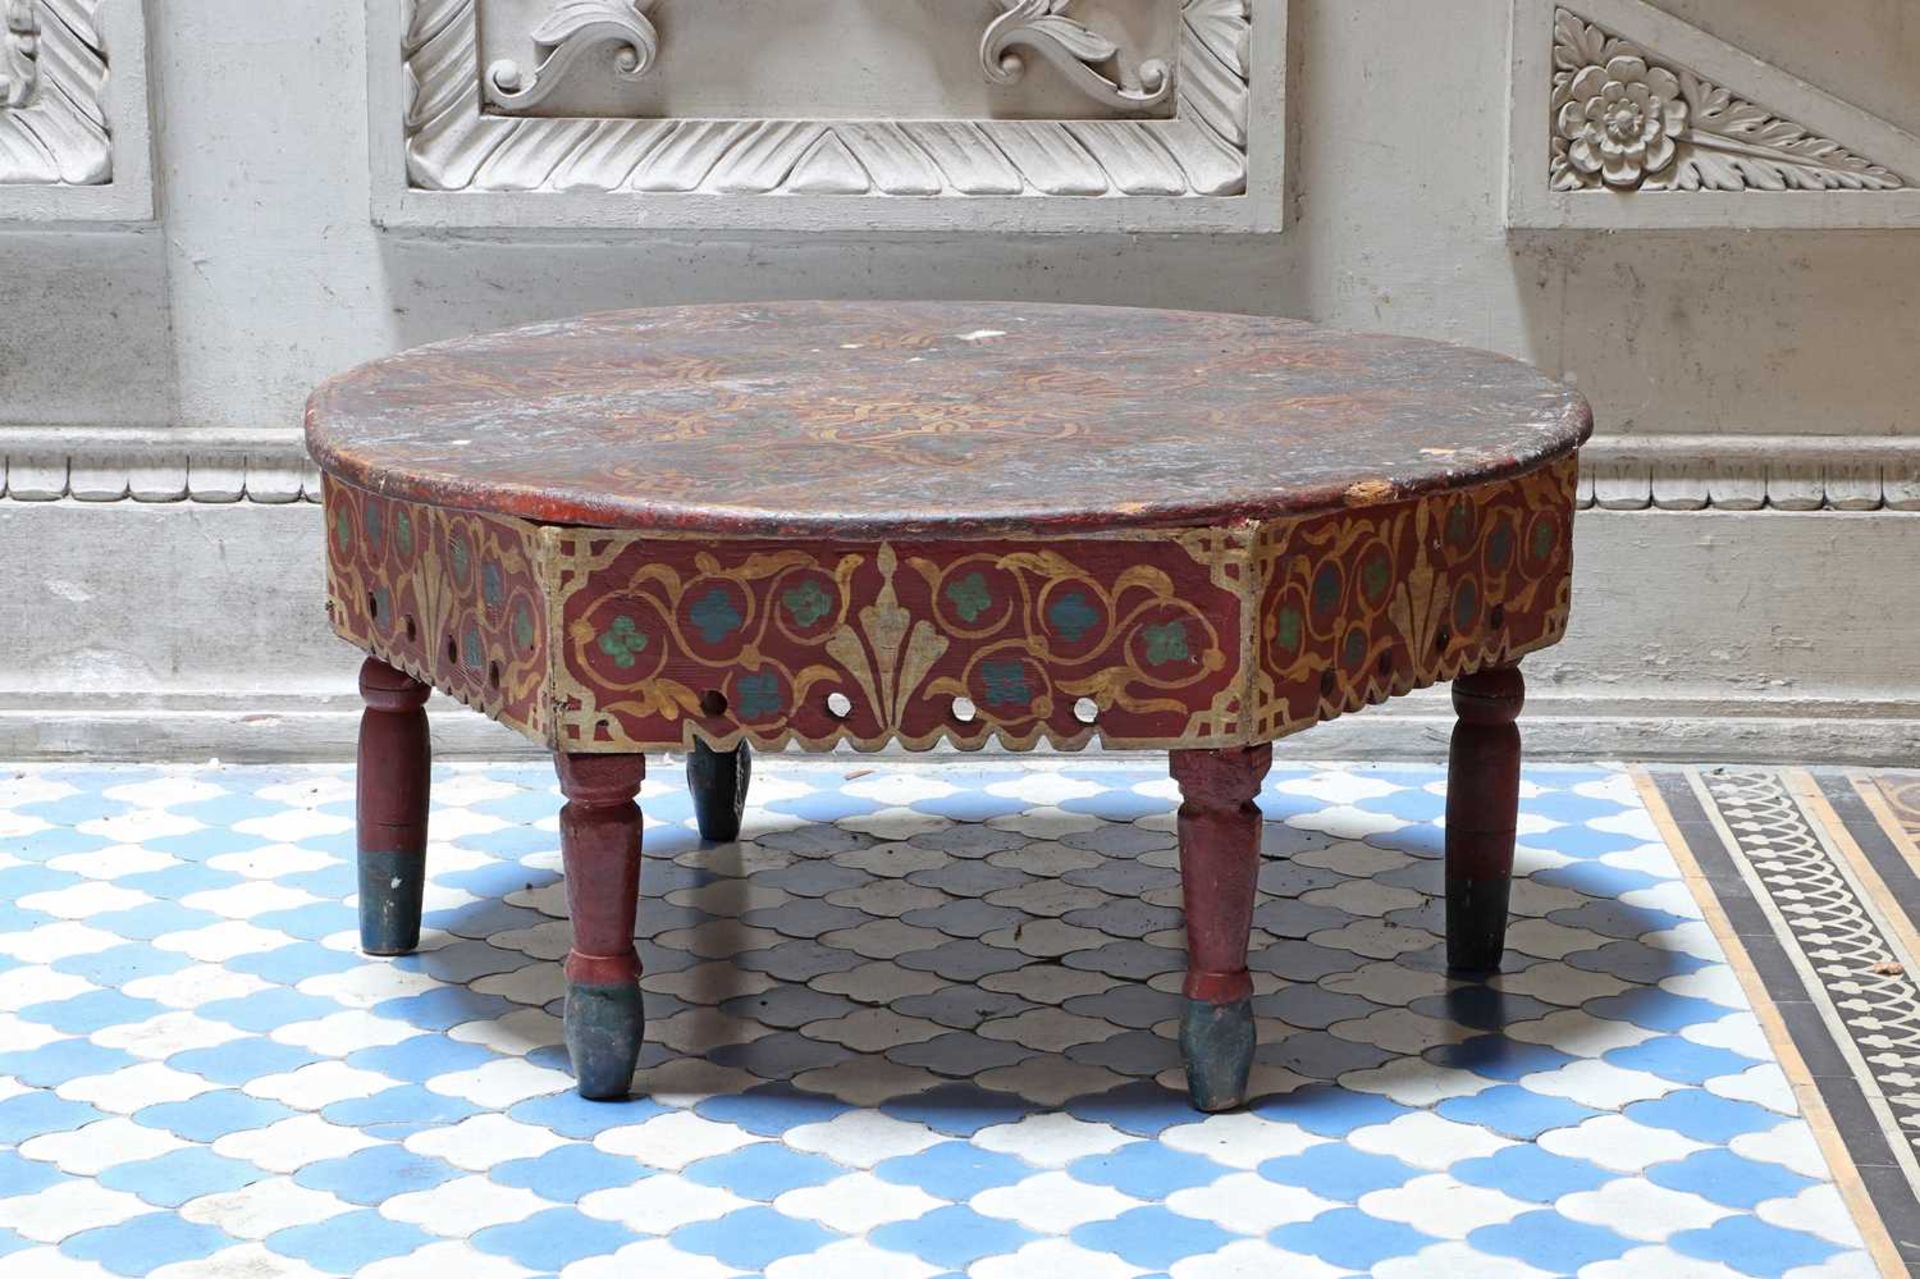 A painted table,